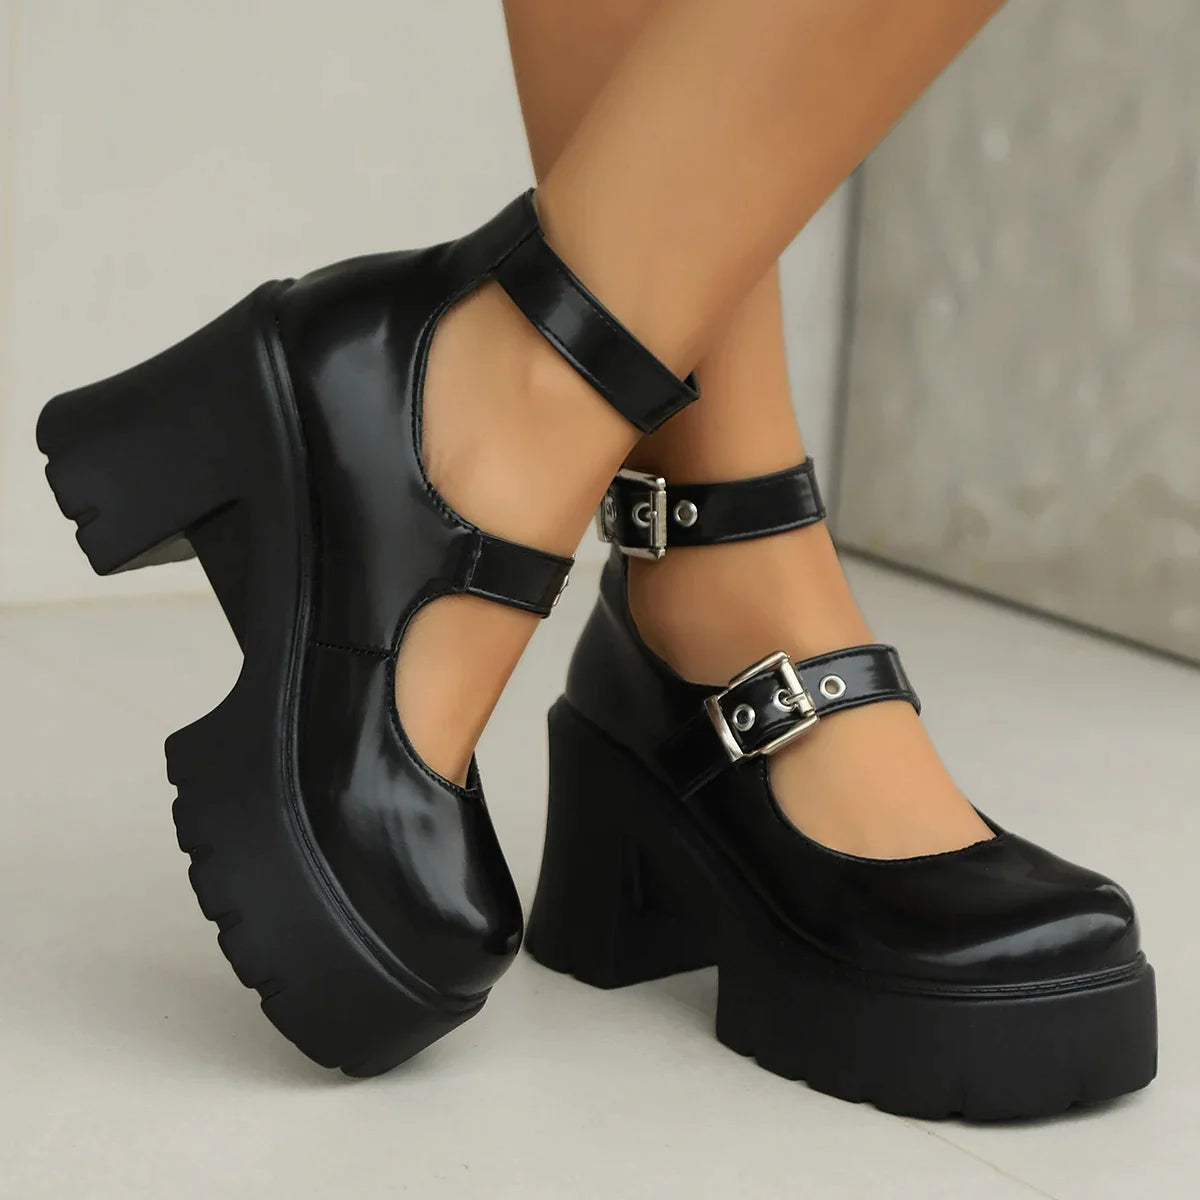 Gominglo - Gothic Chunky Platform Pumps for Women Super High Heels Ankle Strap